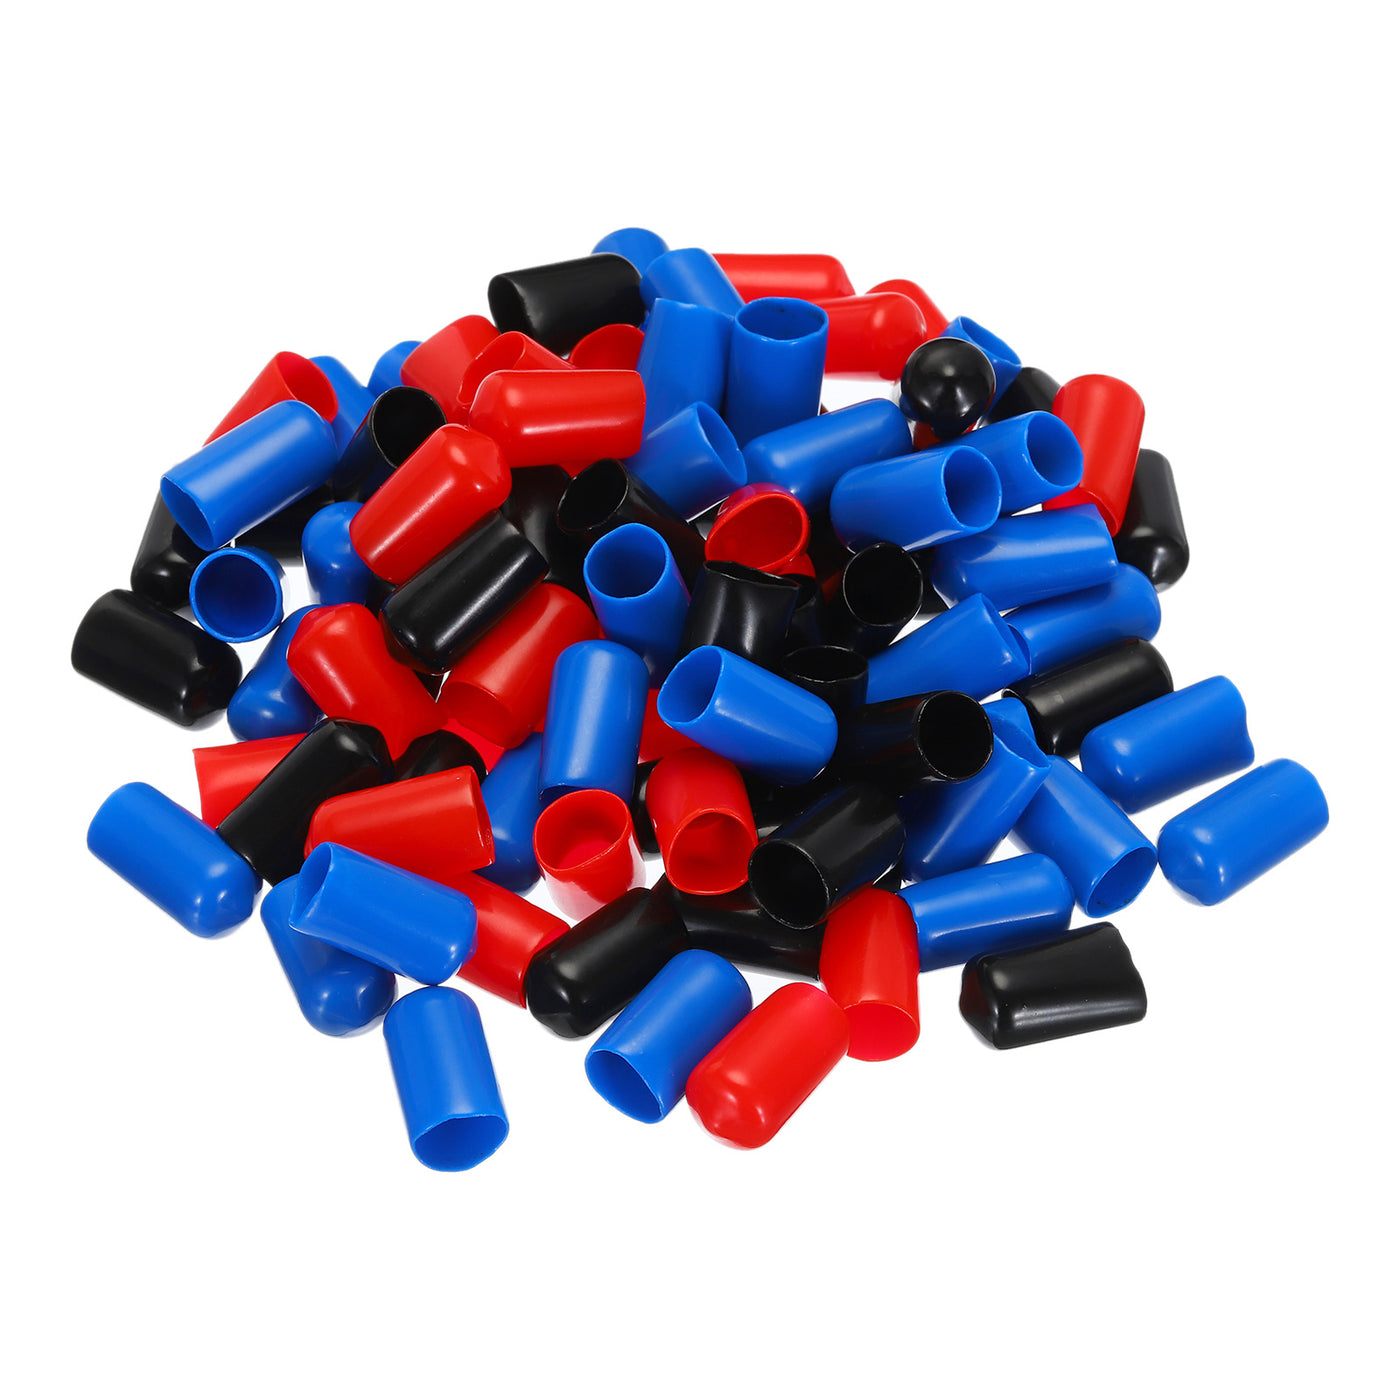 uxcell Uxcell 90pcs Rubber End Caps 11mm ID Vinyl PVC Round Tube Bolt Cap Cover Screw Thread Protectors, Black Red Blue